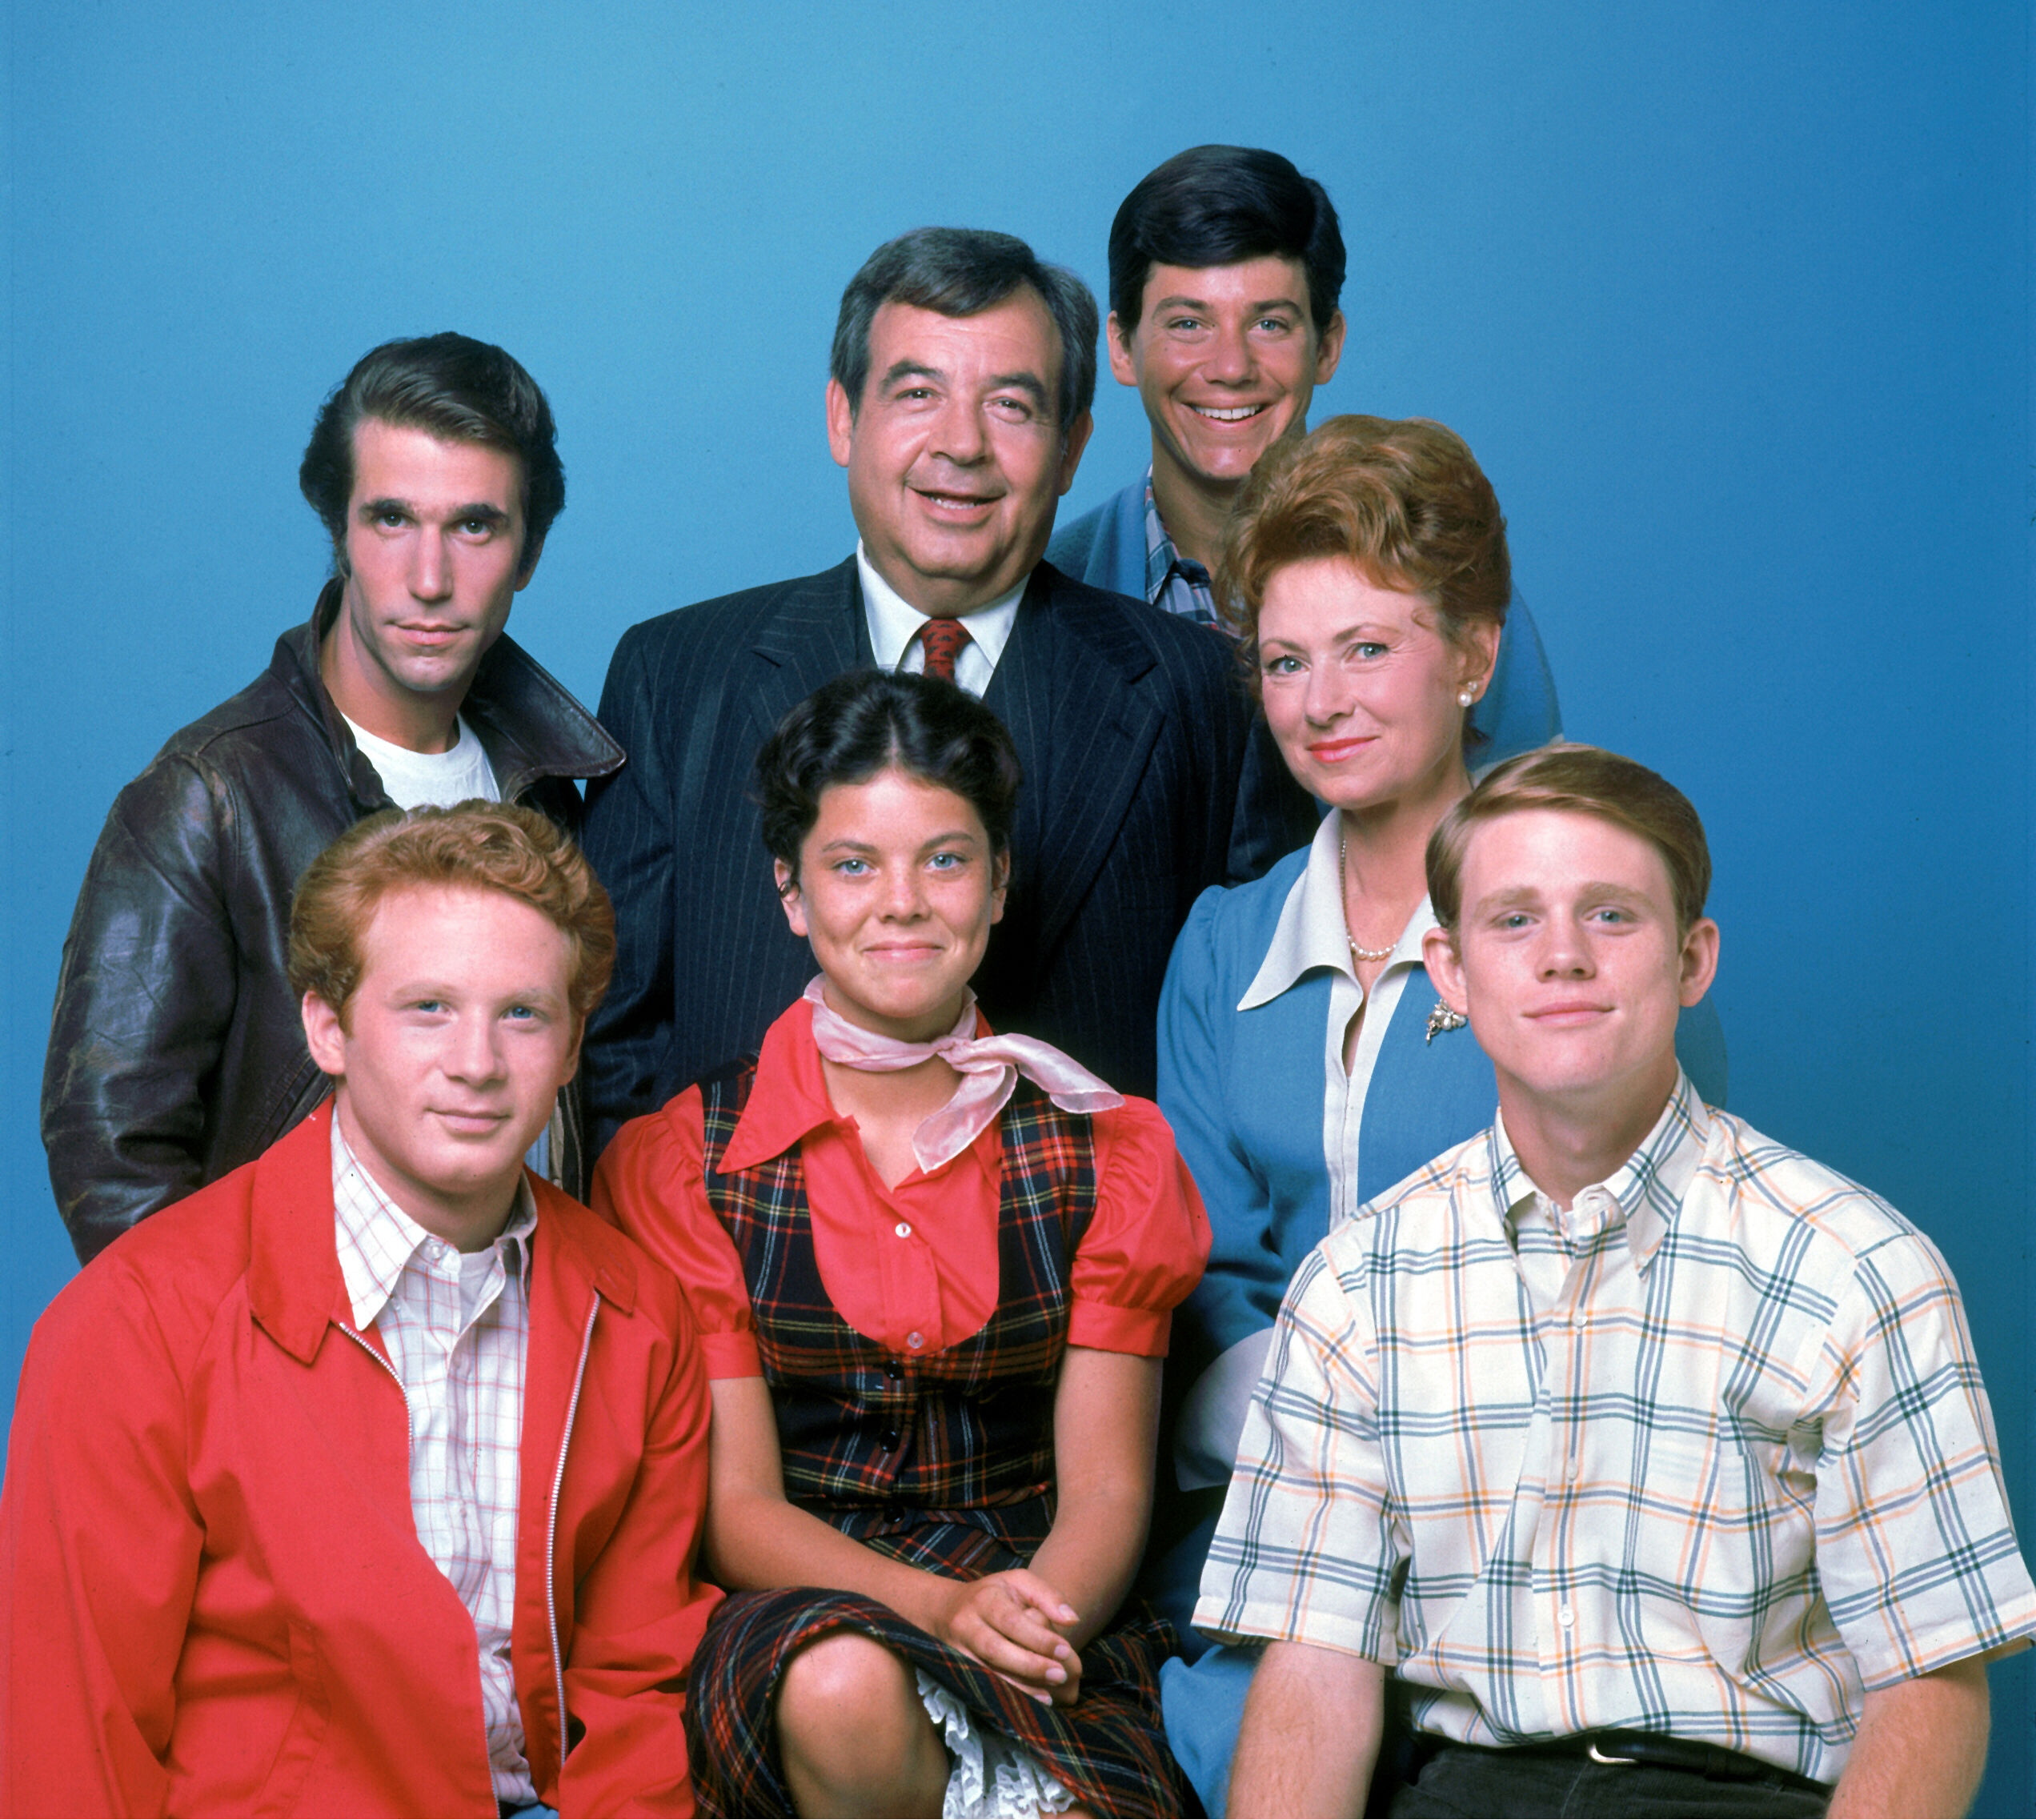 The Cunningham family and cast of Happy Days